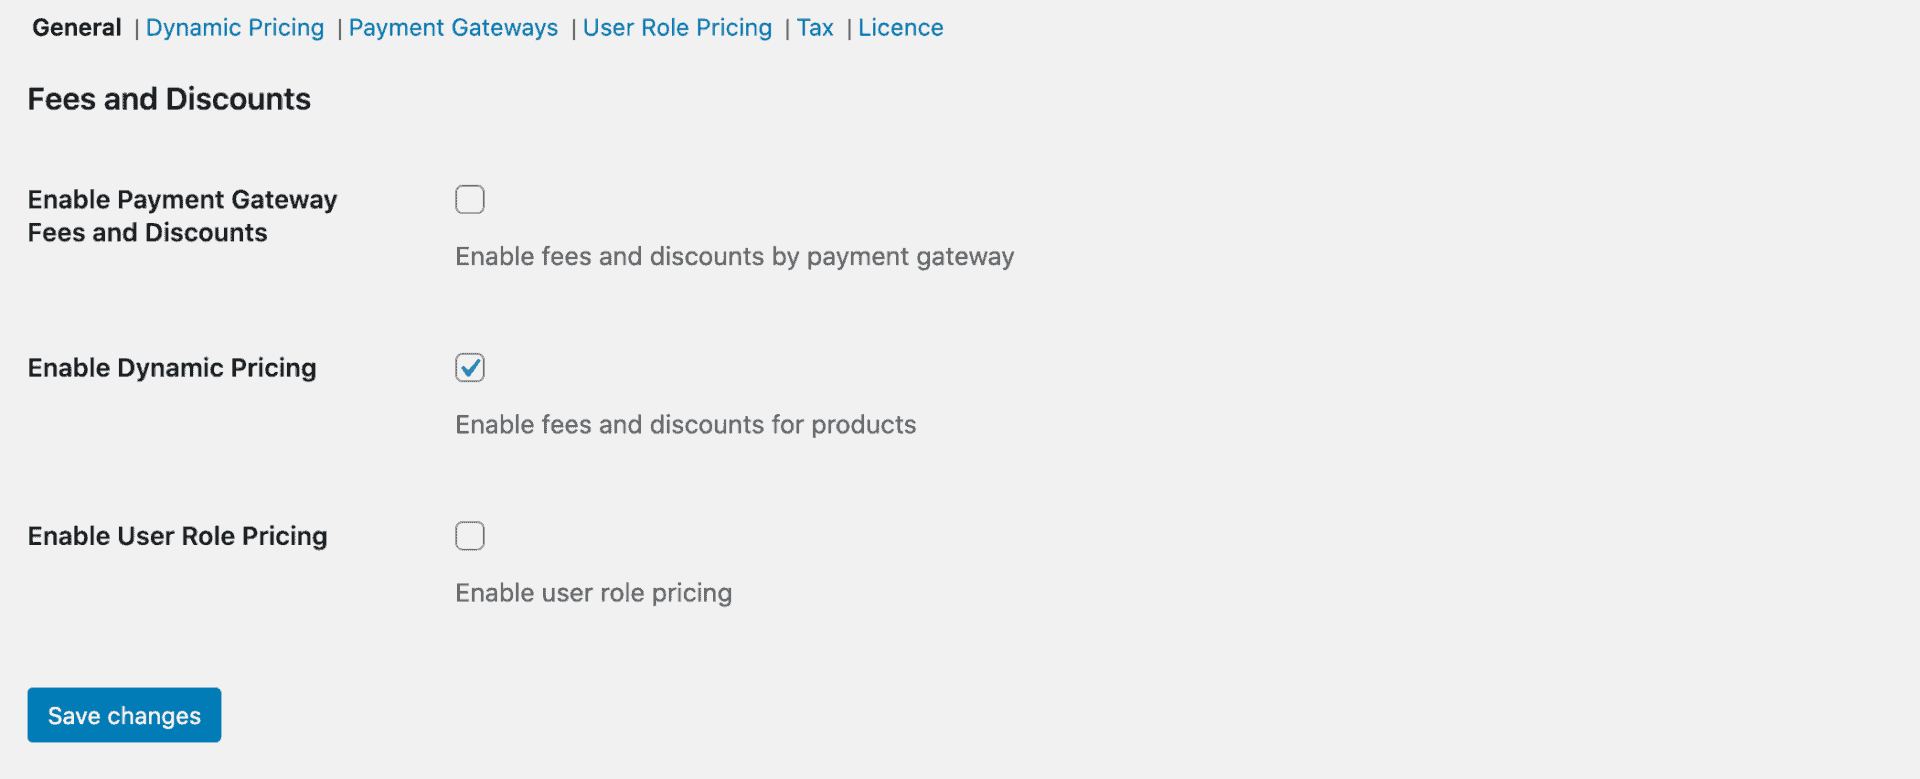 Enable dynamic pricing